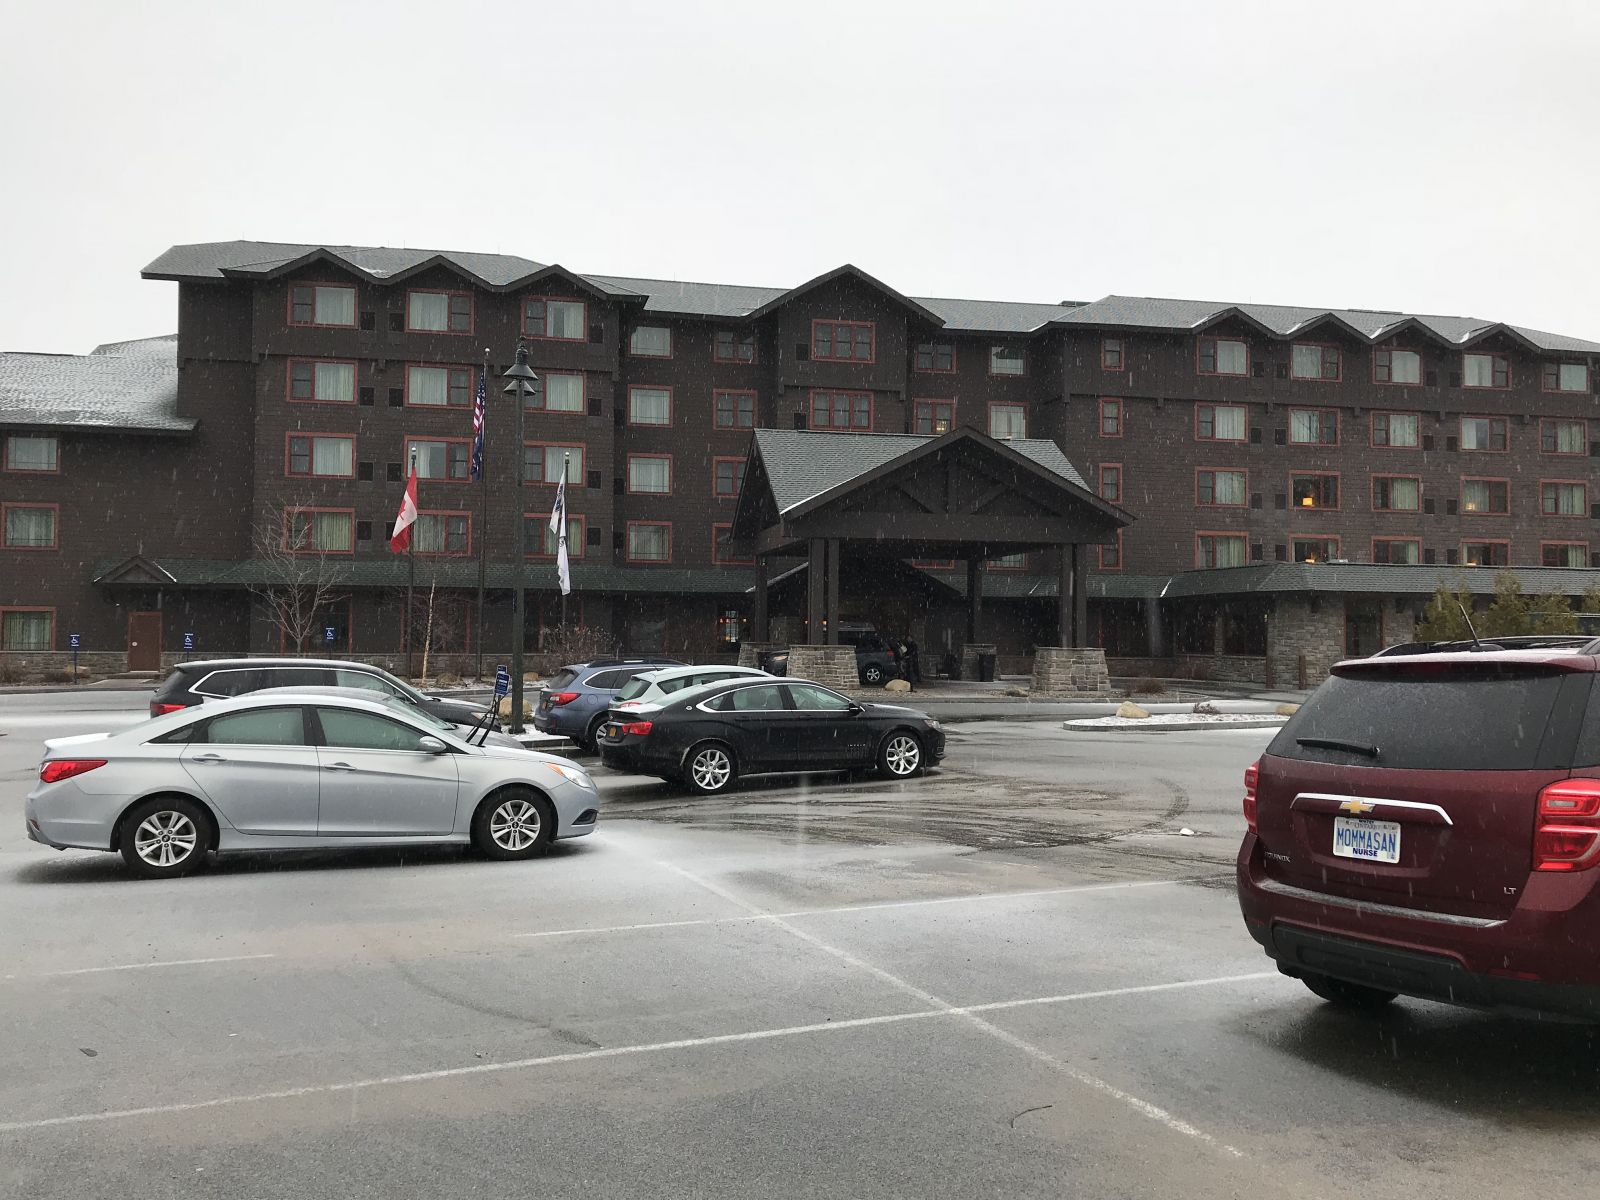 The Hampton Inn. What you can't see from this side is the fact that Mirror Lake is directly on the other side of the building!